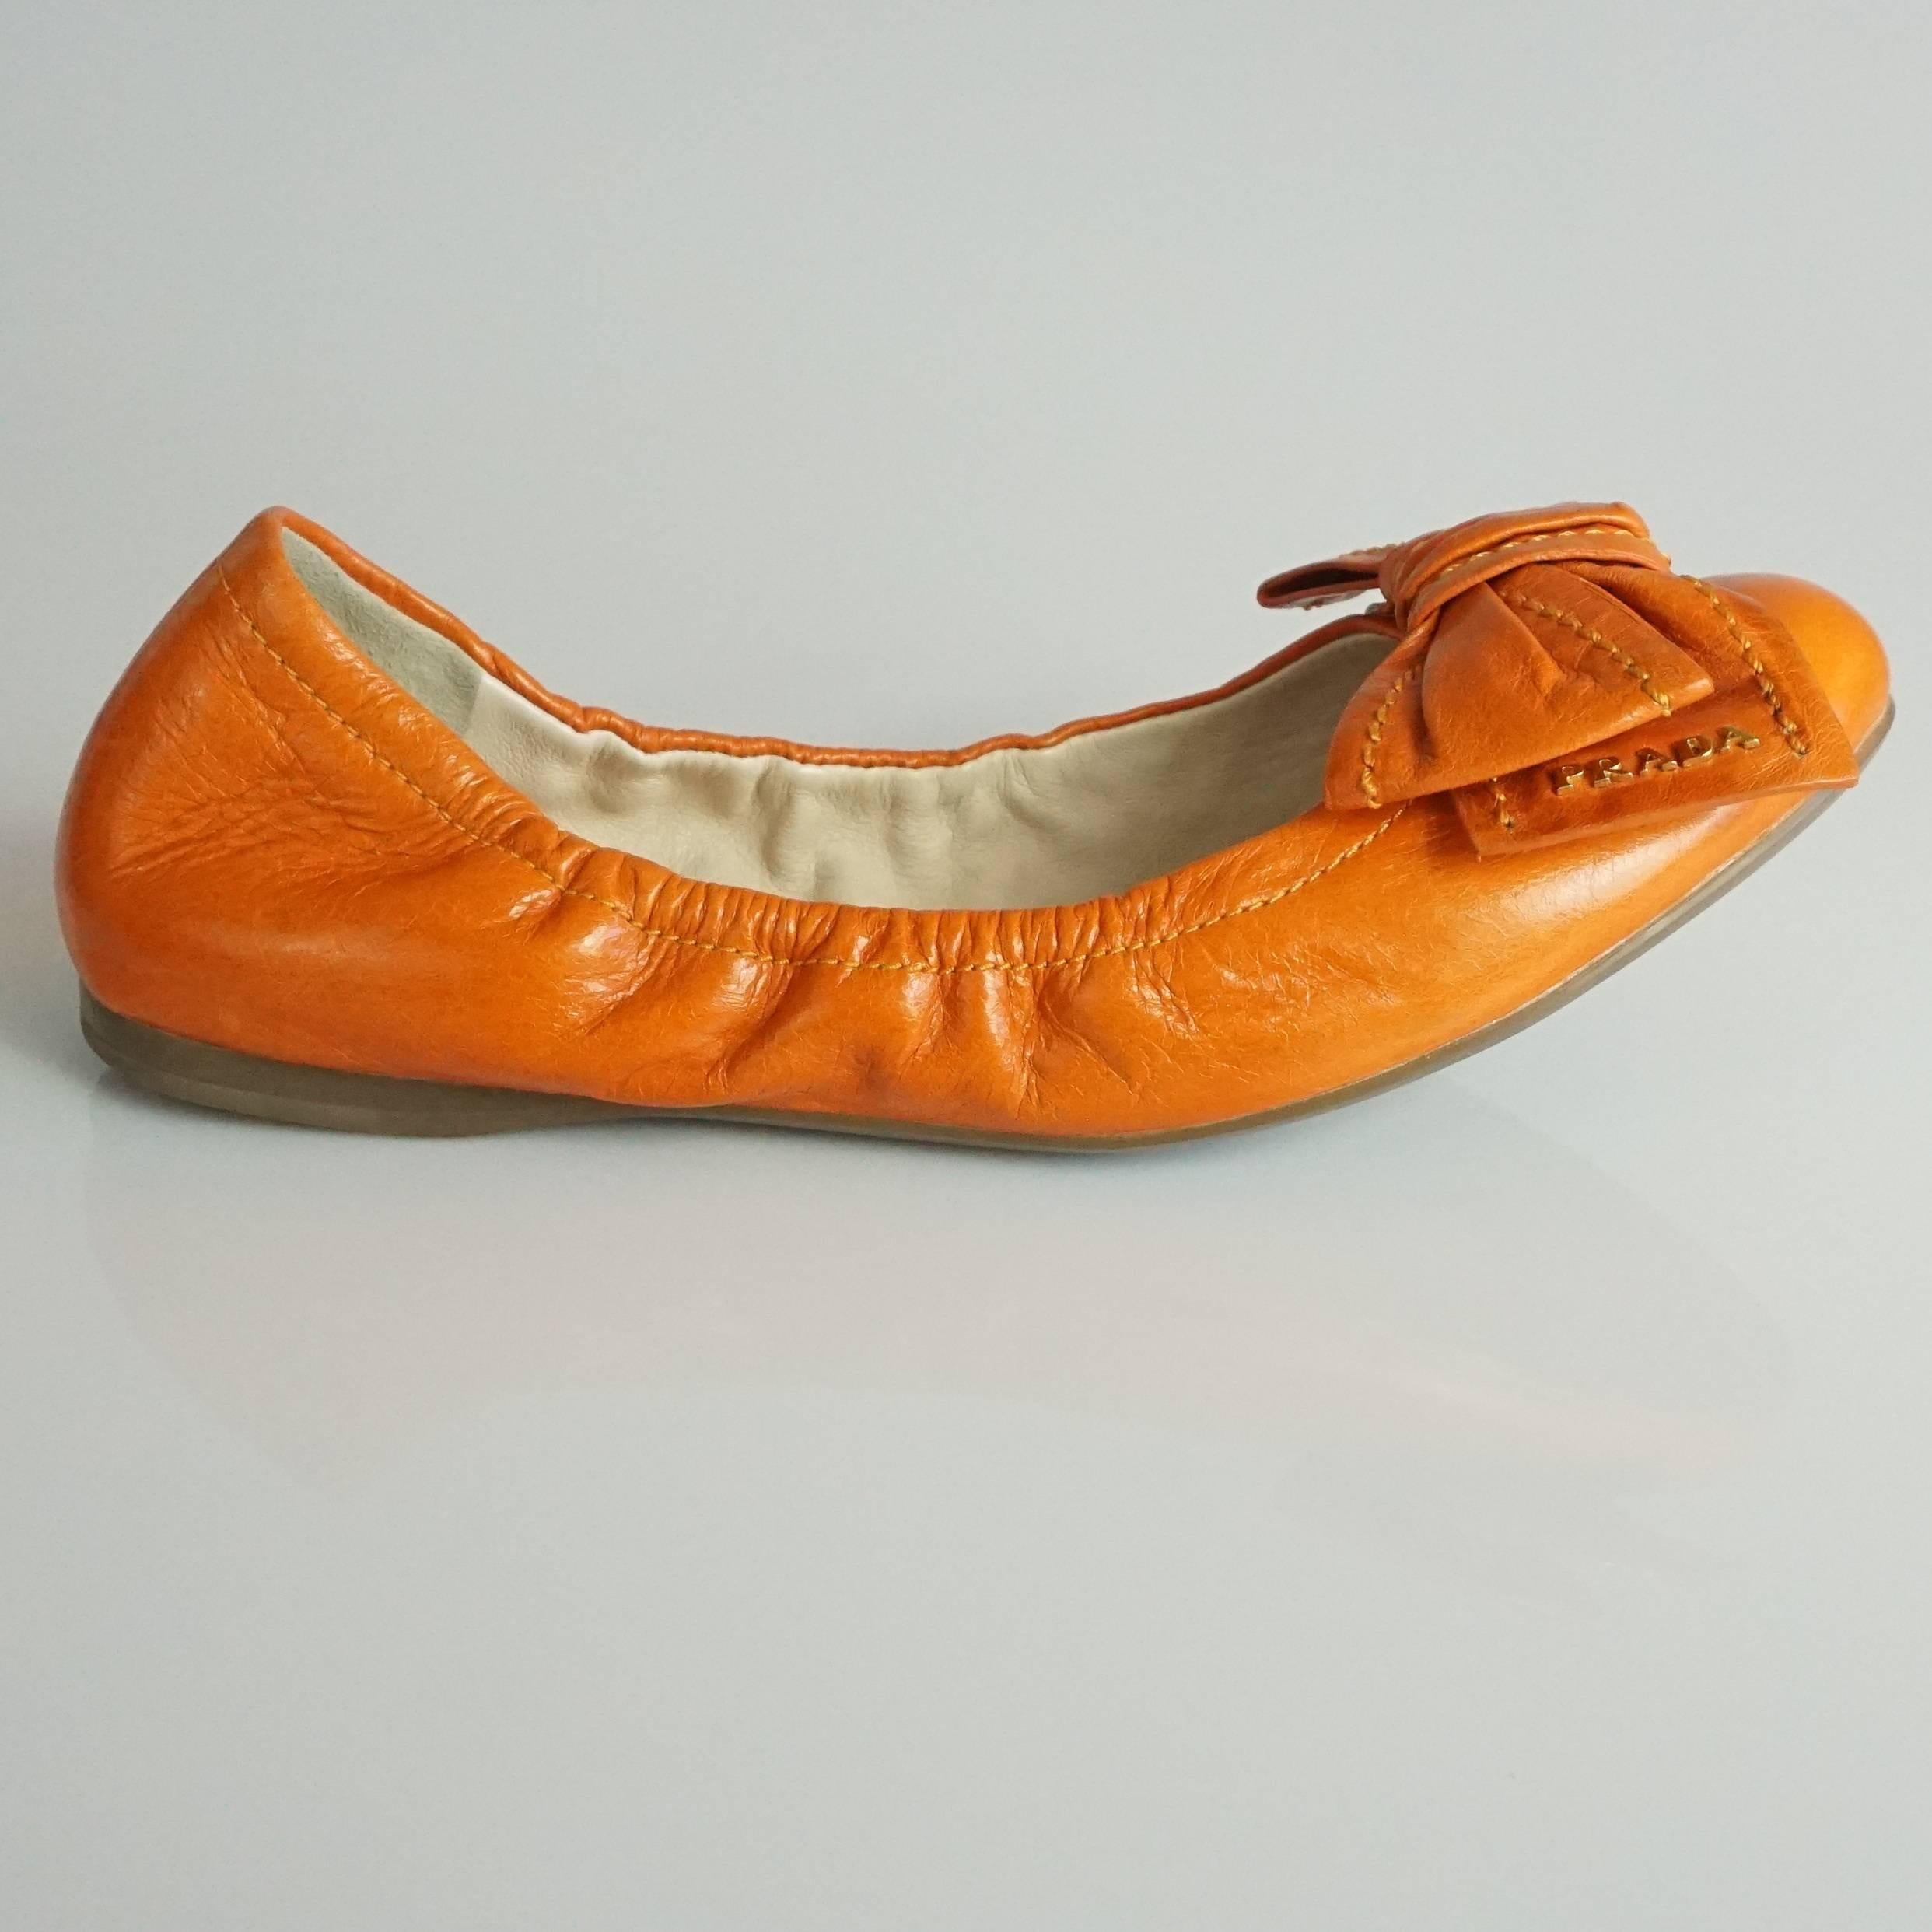 These Prada stretchy ballet flats are orange leather. They have a bow on the front and gold letters spelling out "Prada" on the bow. They are in excellent condition with some scratches / wear on the back.